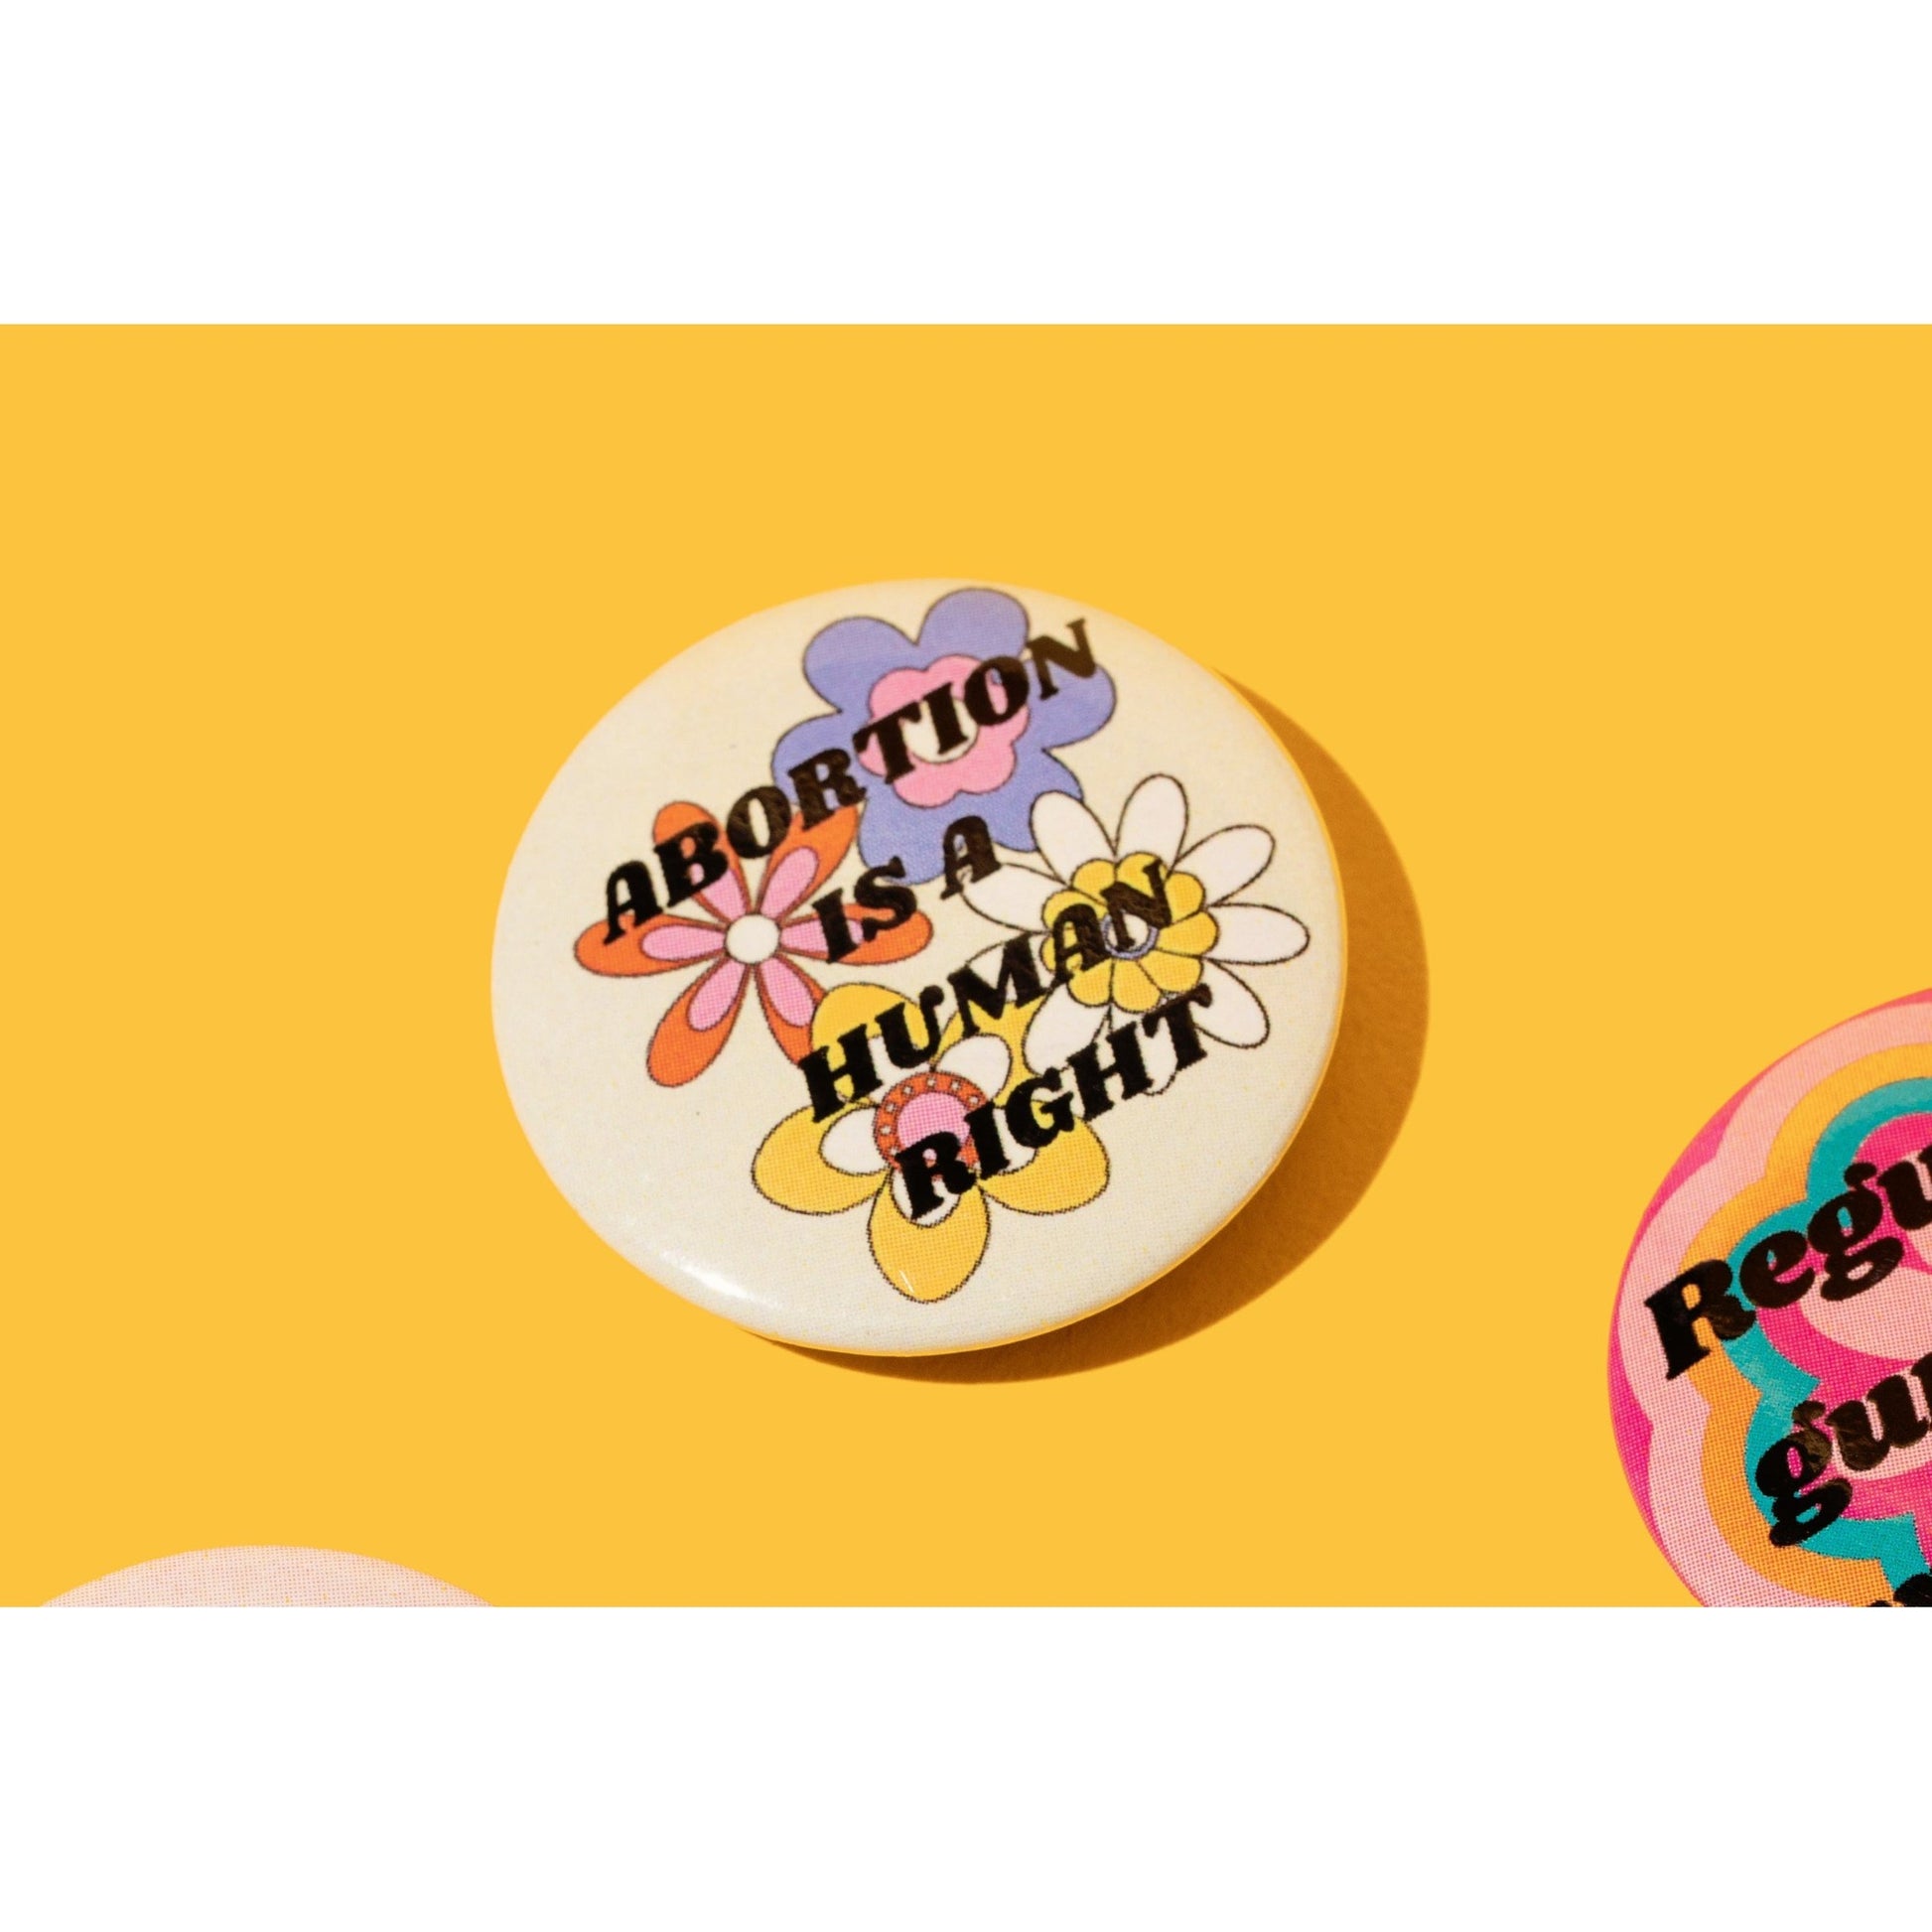 Abortion is a Human Right 1.25" Button in Groovy Flower Design